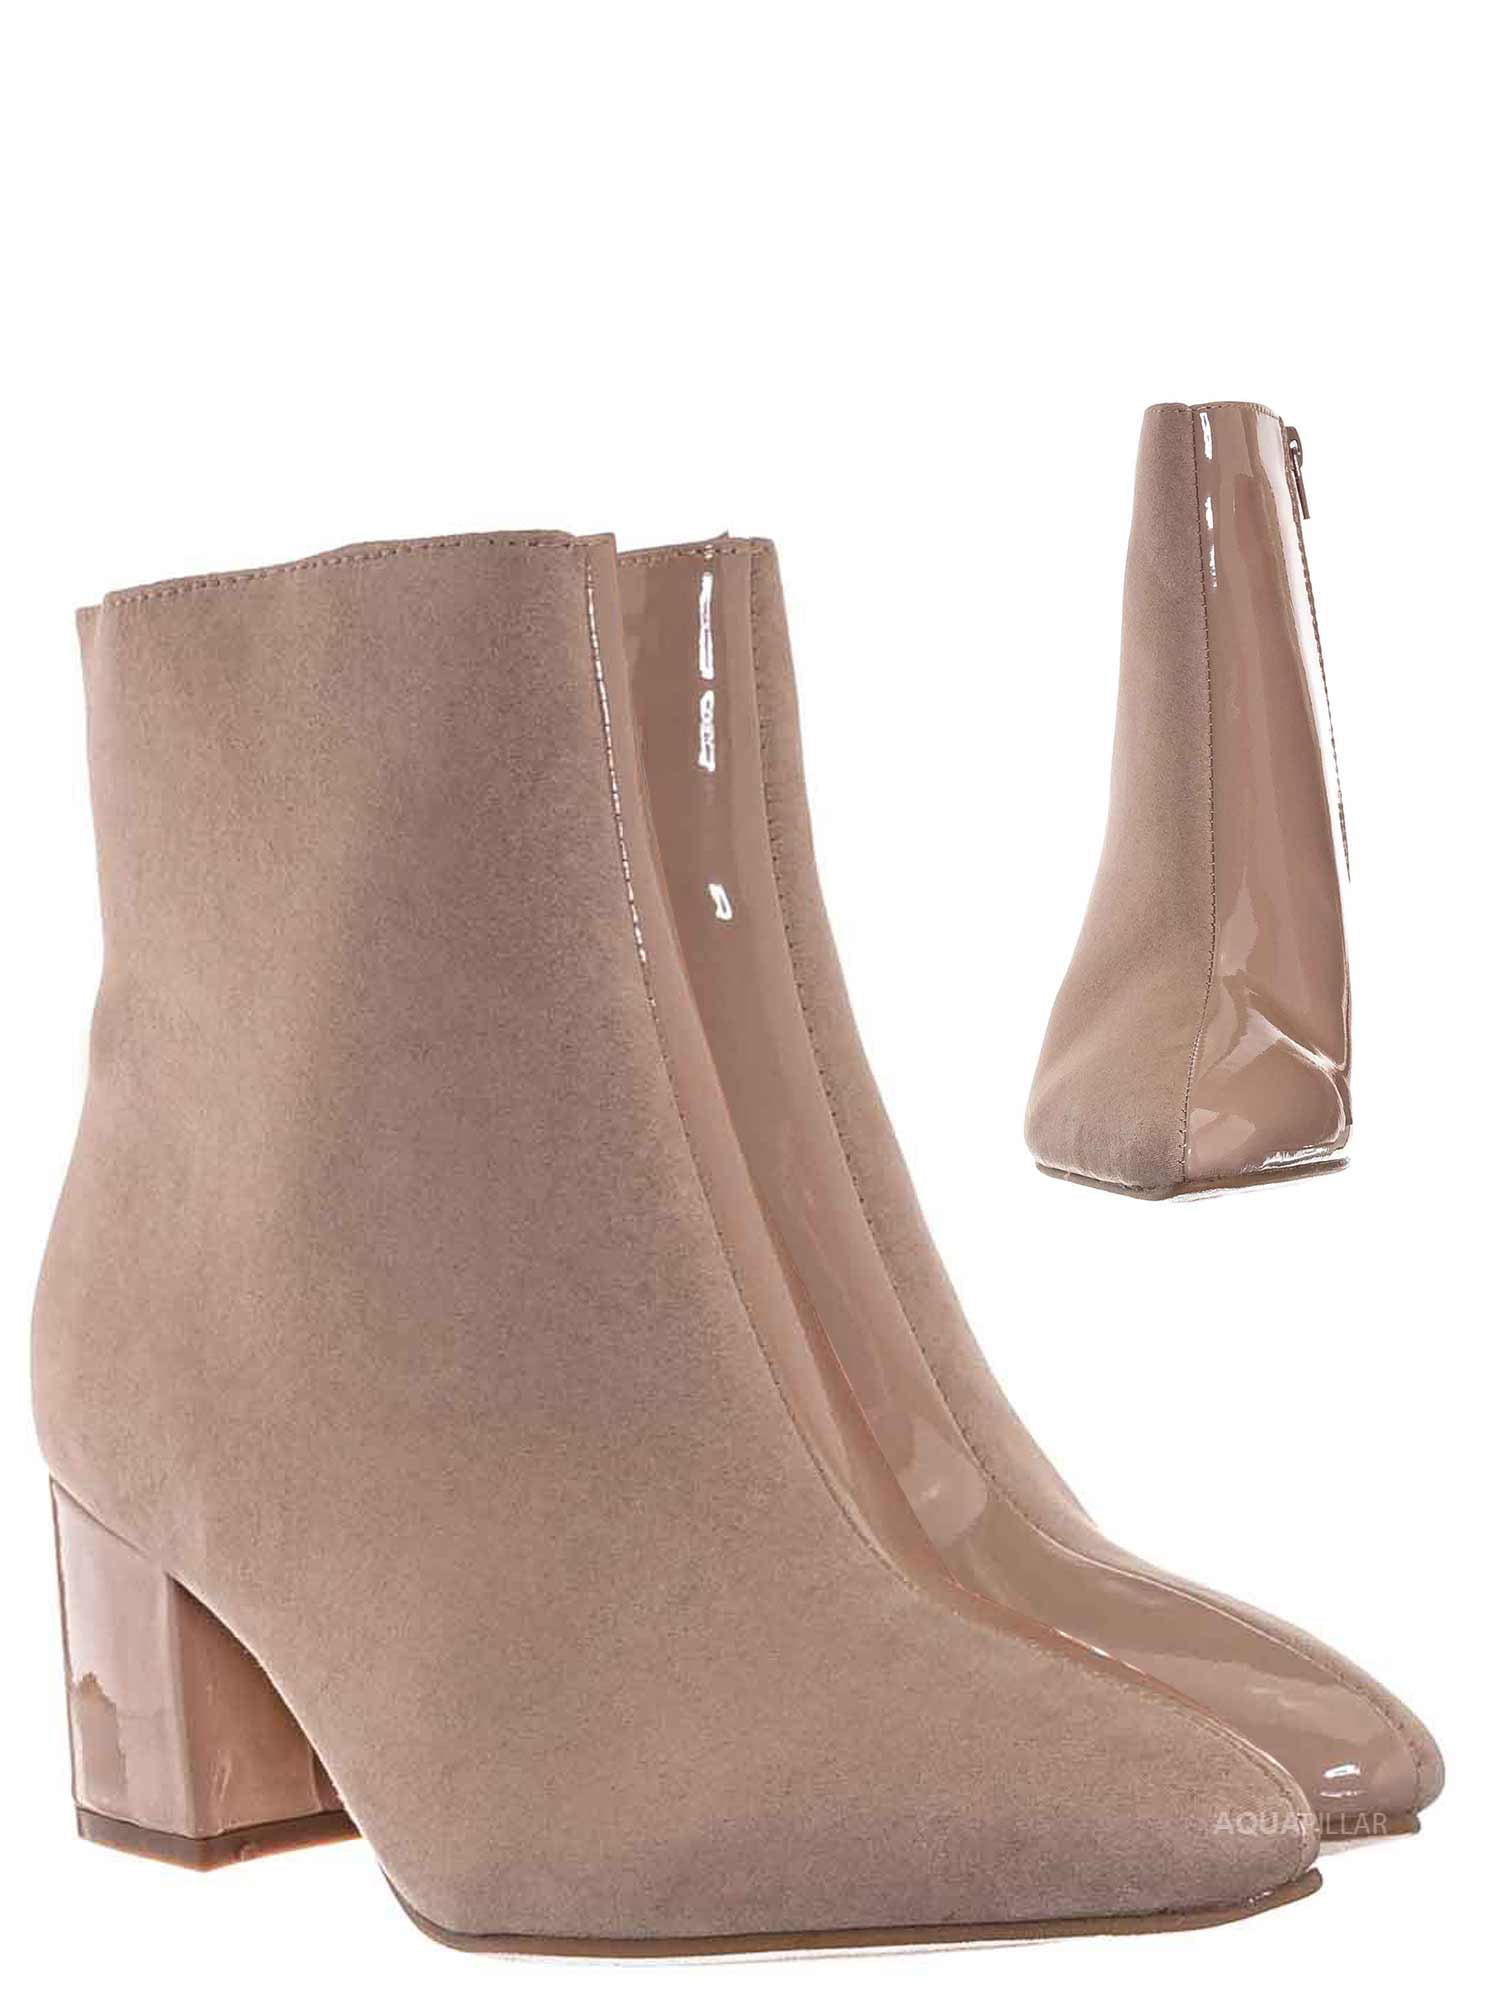 Womens Trendy Inside Zip Up Pointed Toe Dressy Booties Block High Heel Ankle Boots with Zipper Beige